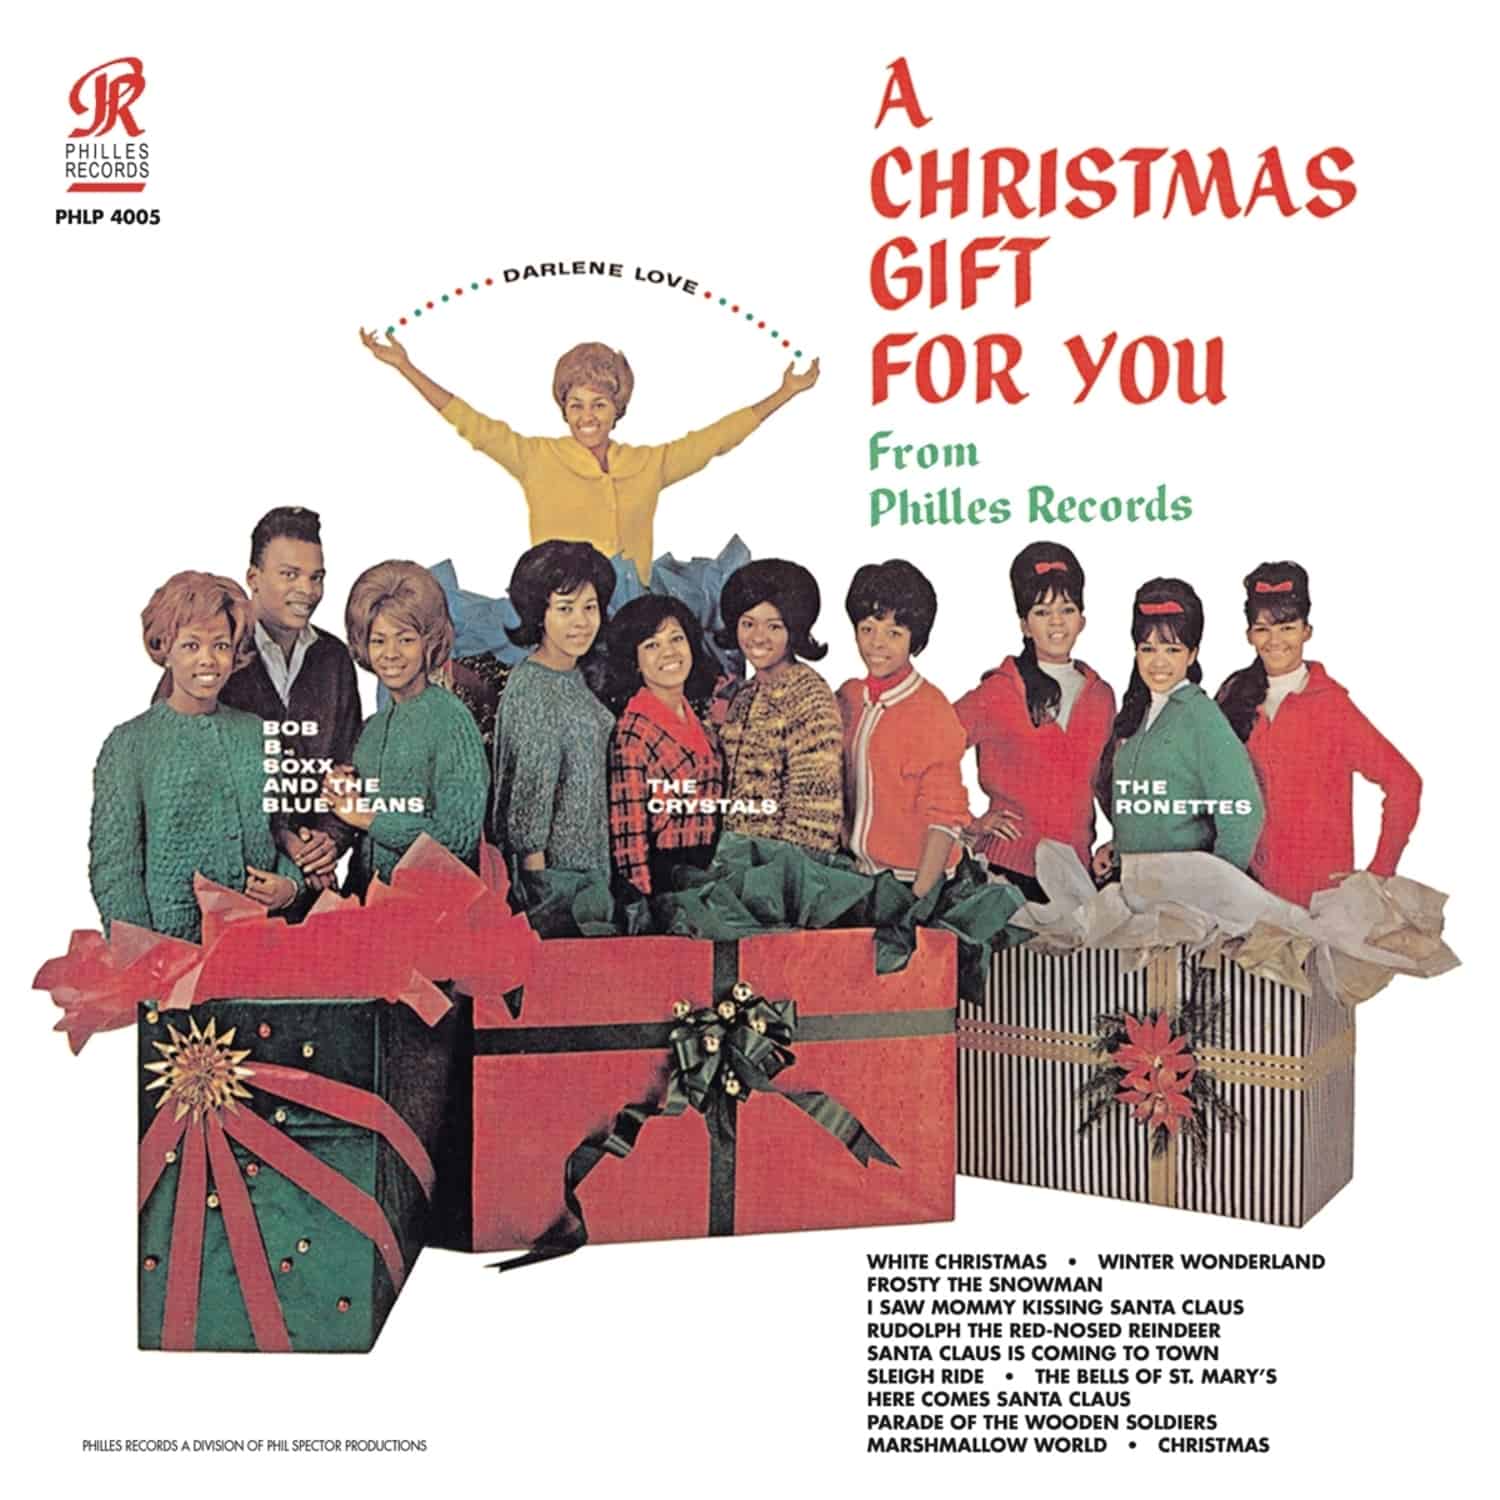 Phil Spector - A CHRISTMAS GIFT FOR YOU FROM PHIL SPECTOR 